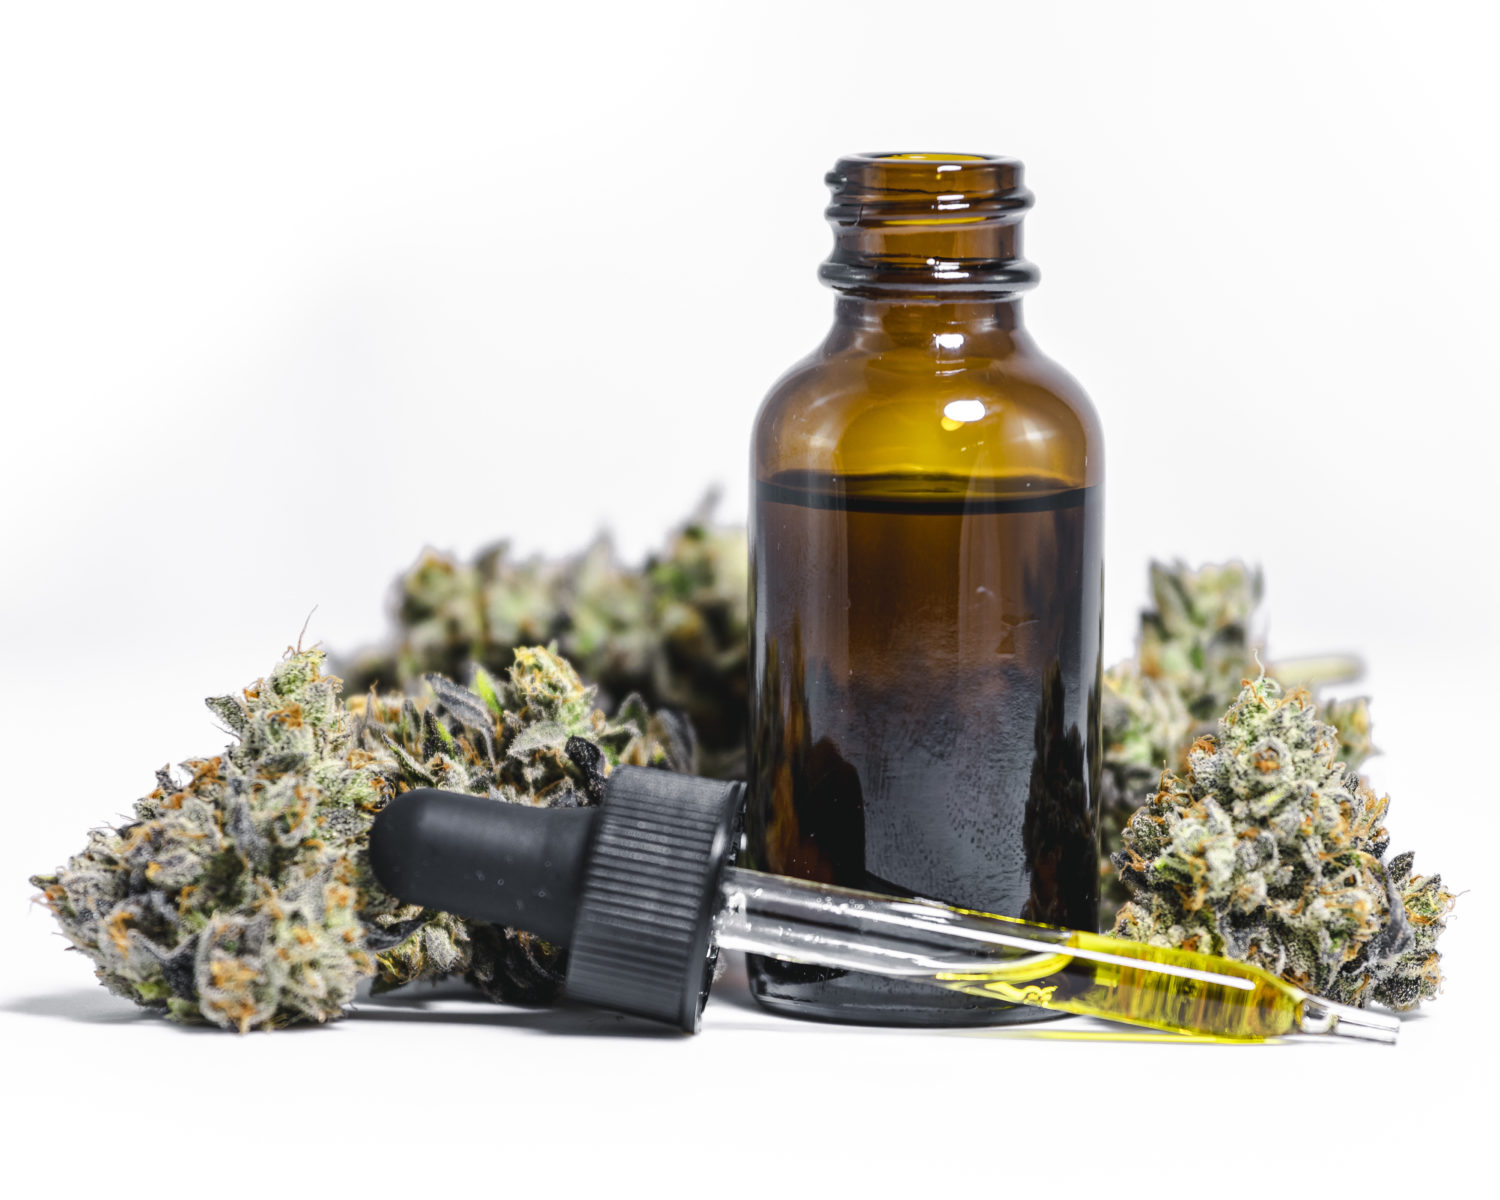 Does Cbd Pure Oil Help Inflammation